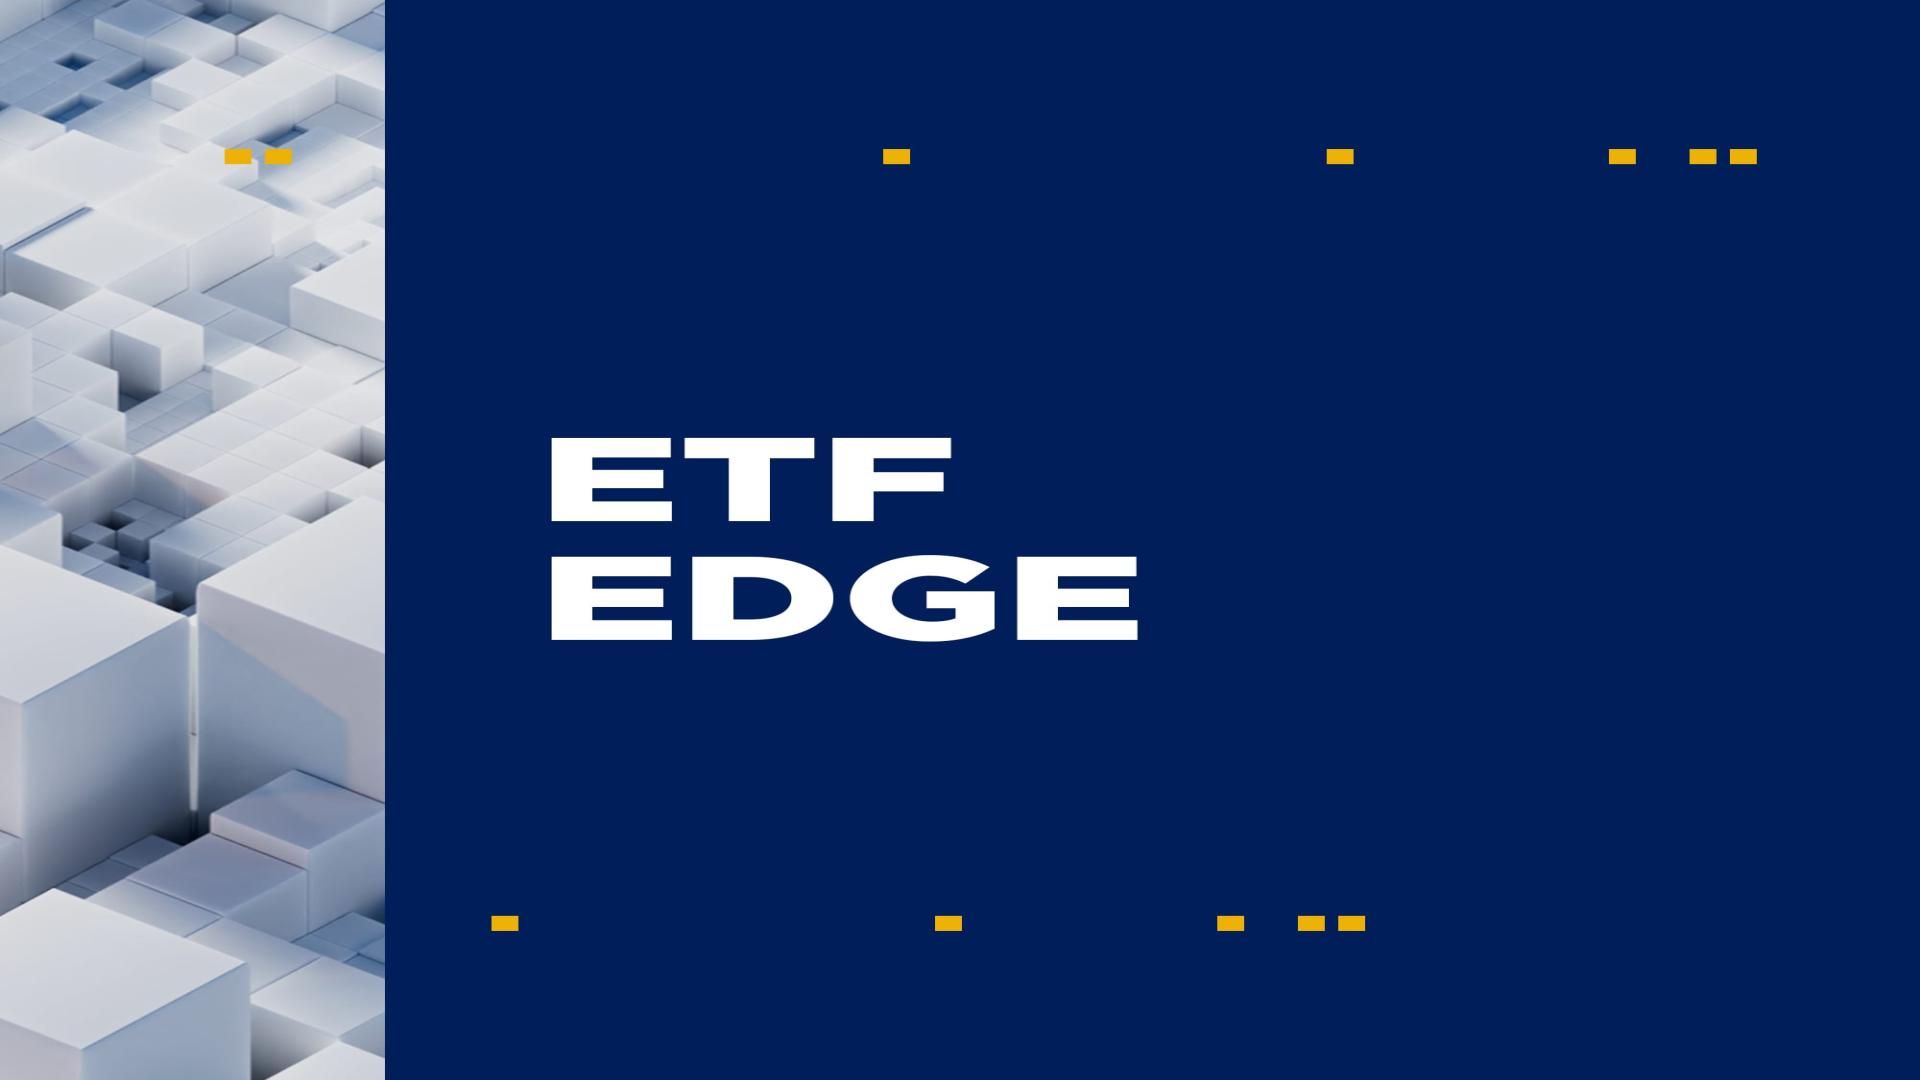 Watch now: ETF Edge on investing in private tech companies